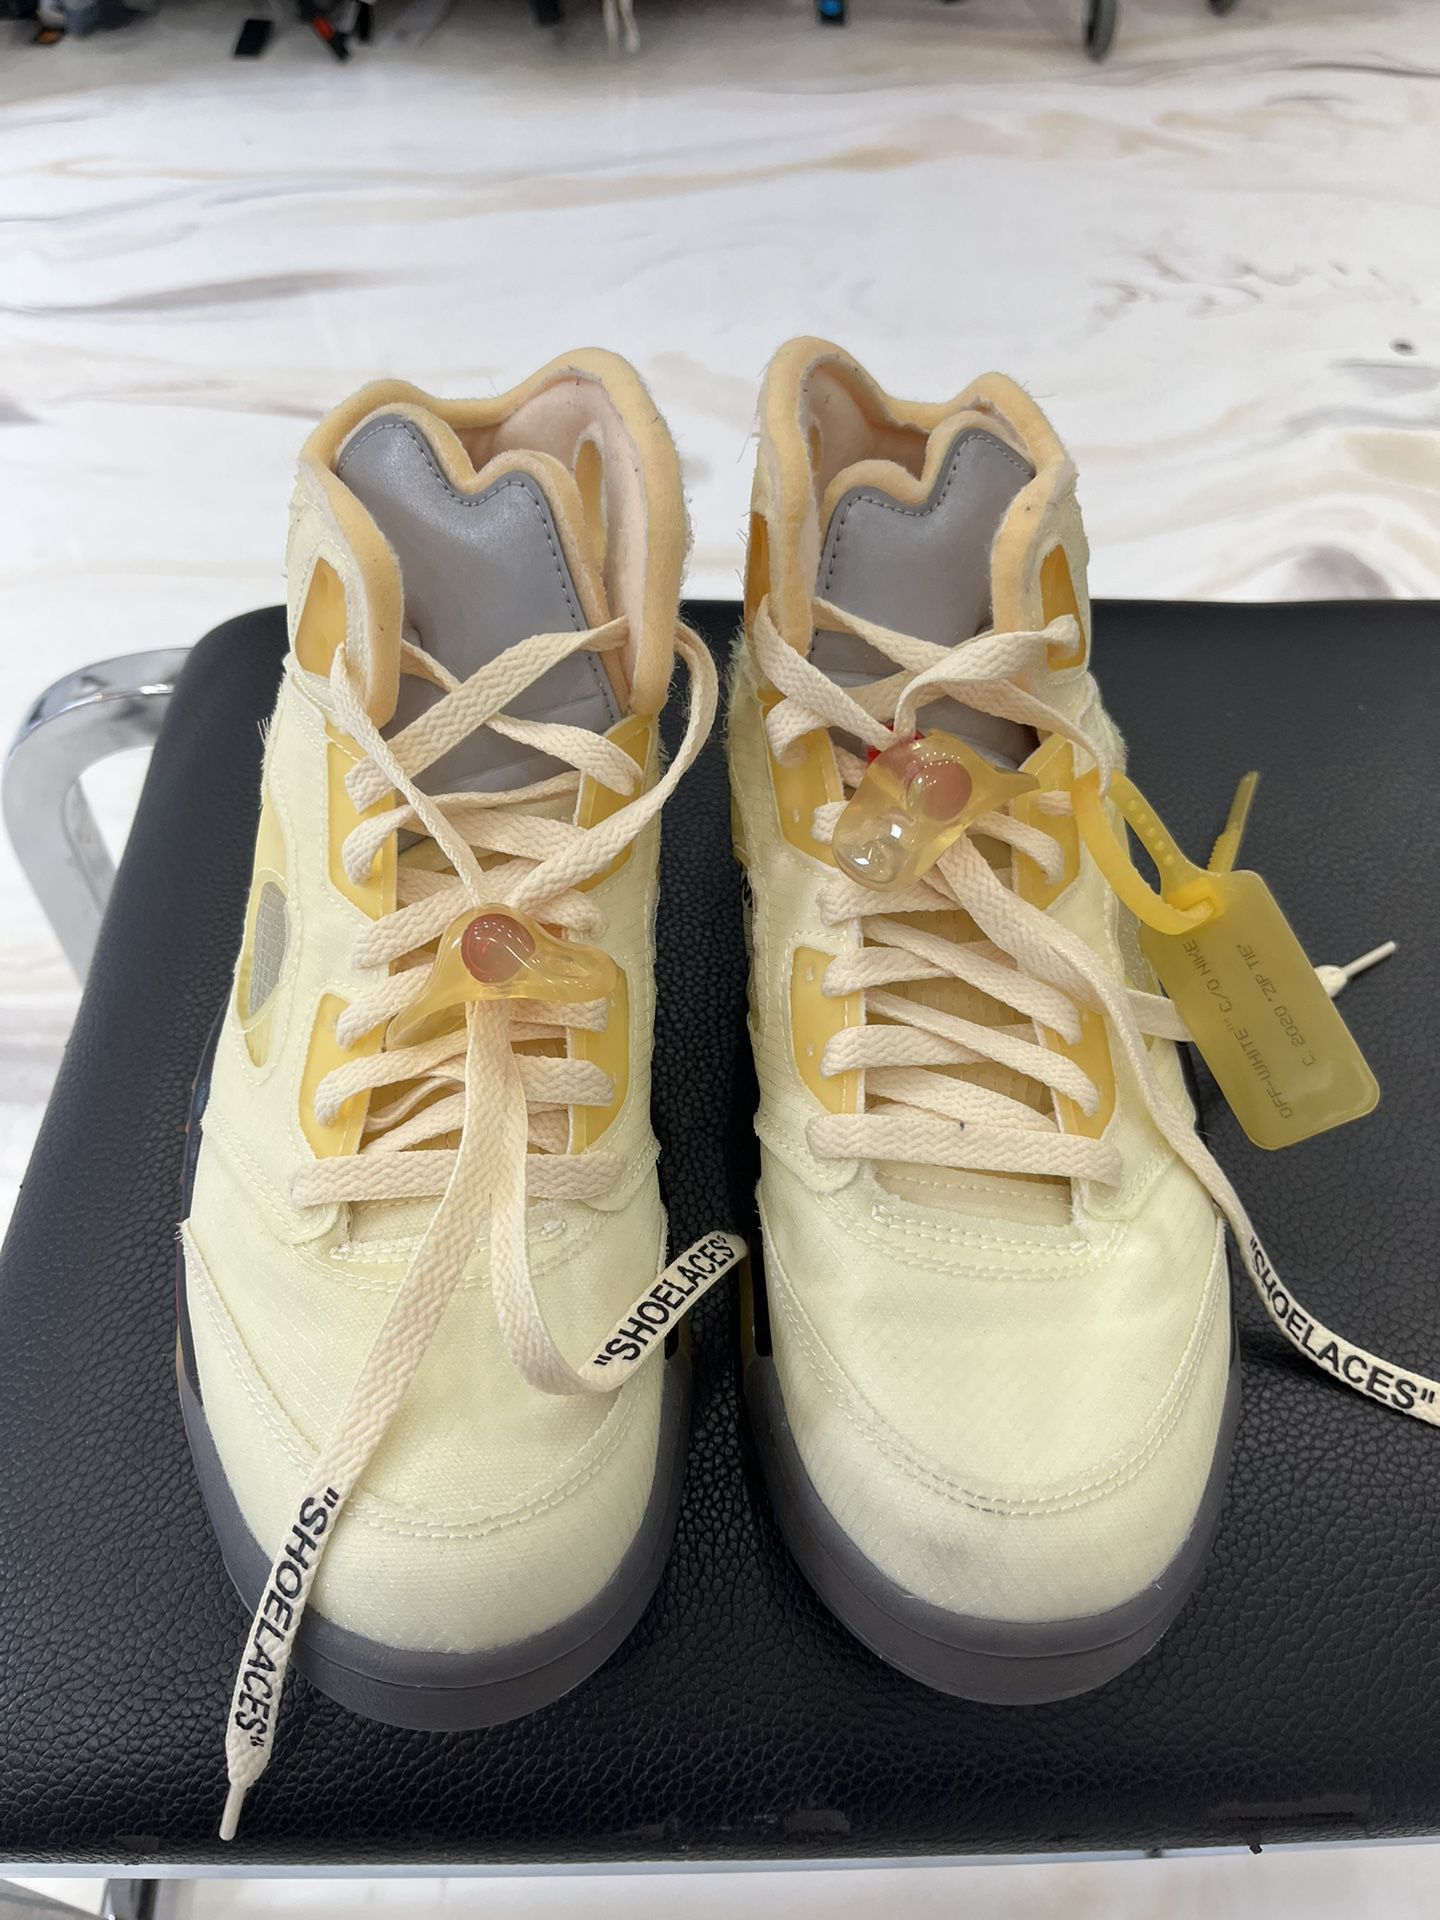 Jordan 5  X Off White Sail Size https://offerup.com/redirect/?o=OC5VUw== Pre-owned 